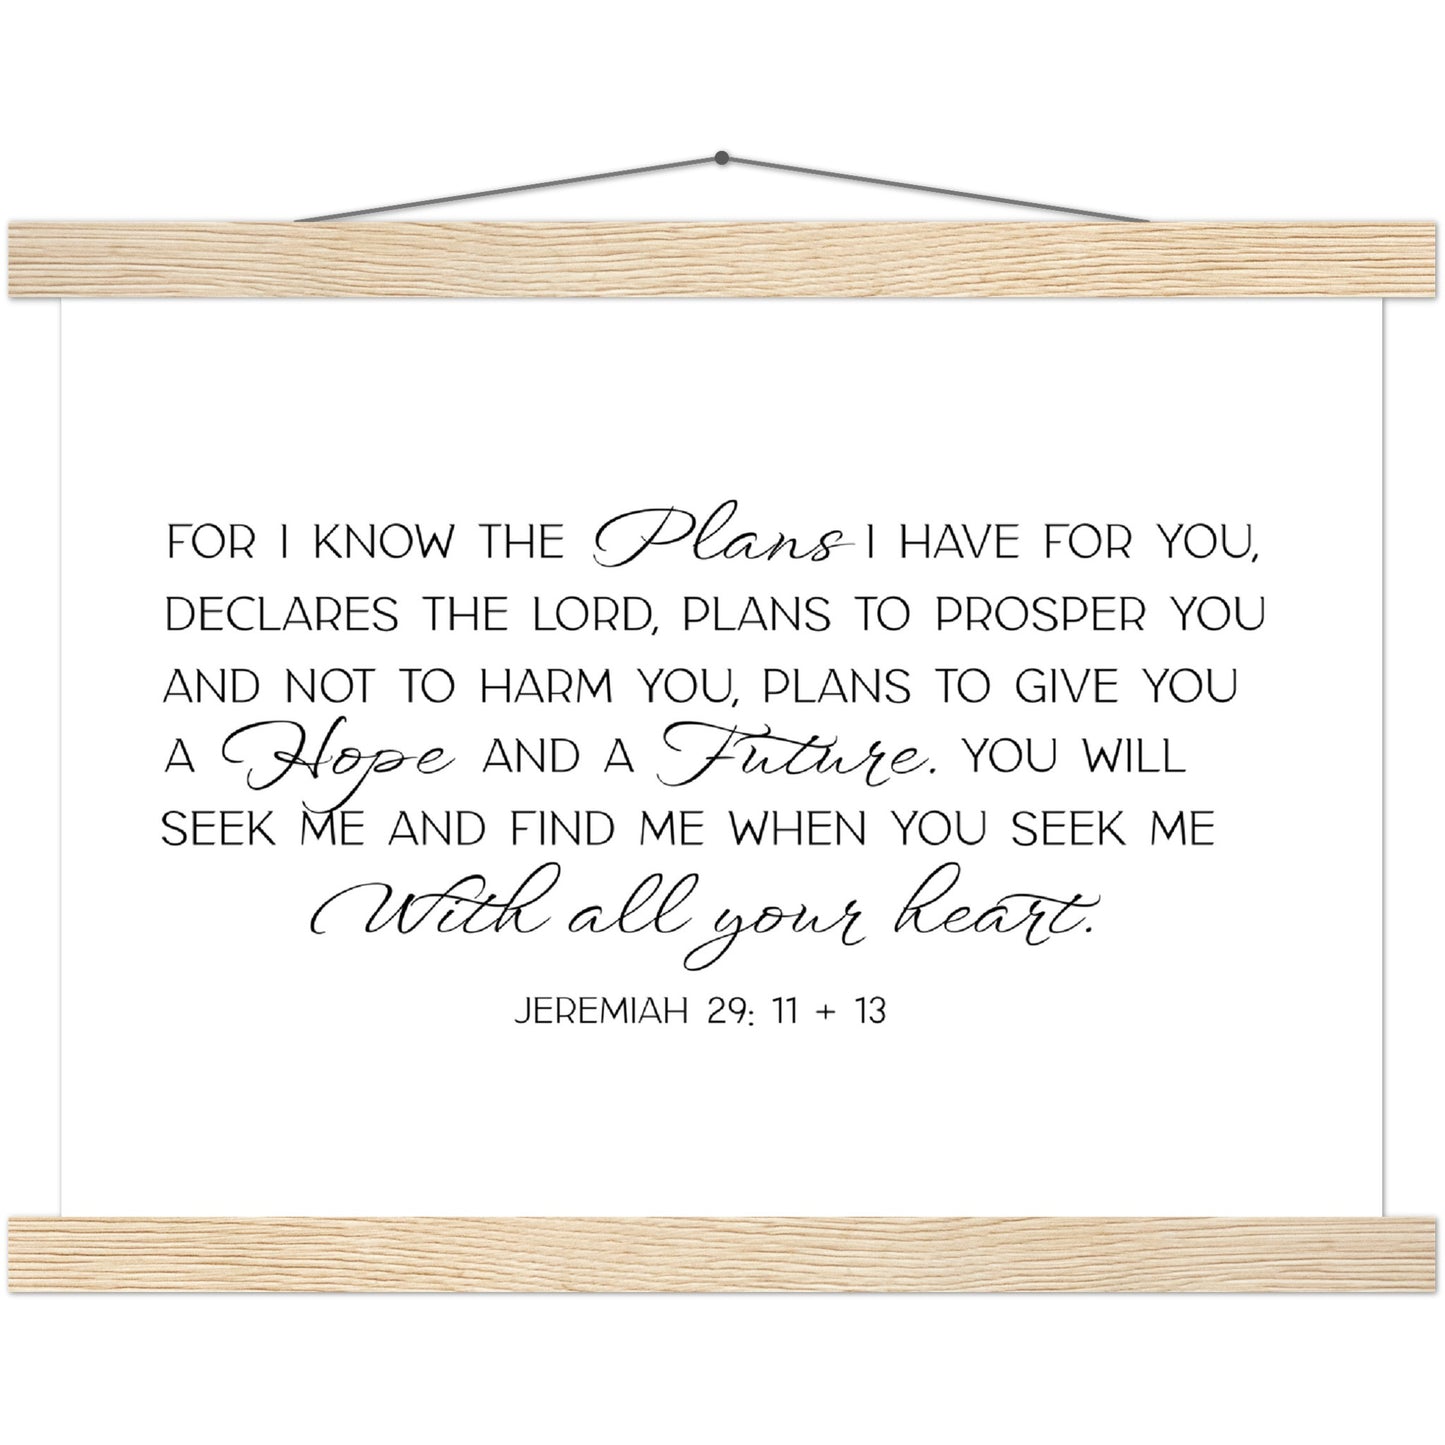 Home Decor | For I Know The Plans | Christian Wall Art | Jeremiah 29:11 | Premium Poster with Banner Wood